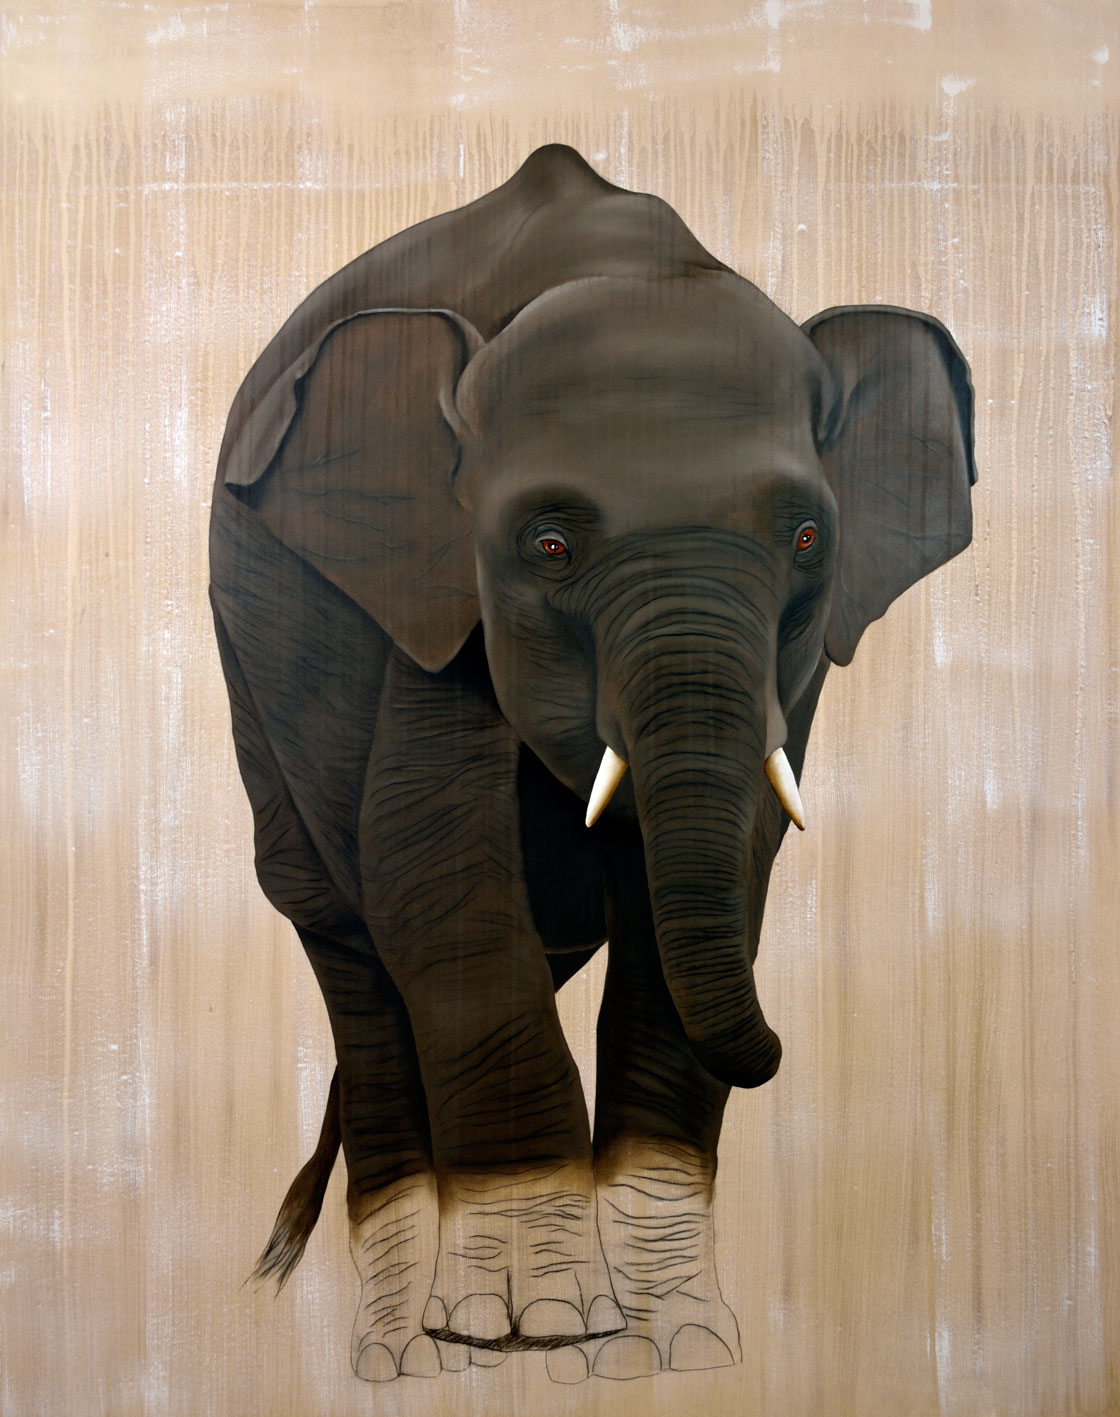 ELEPHAS MAXIMUS elephas-maximus-baby-elephant-asian-delete-threatened-endangered-extinction Thierry Bisch Contemporary painter animals painting art decoration nature biodiversity conservation